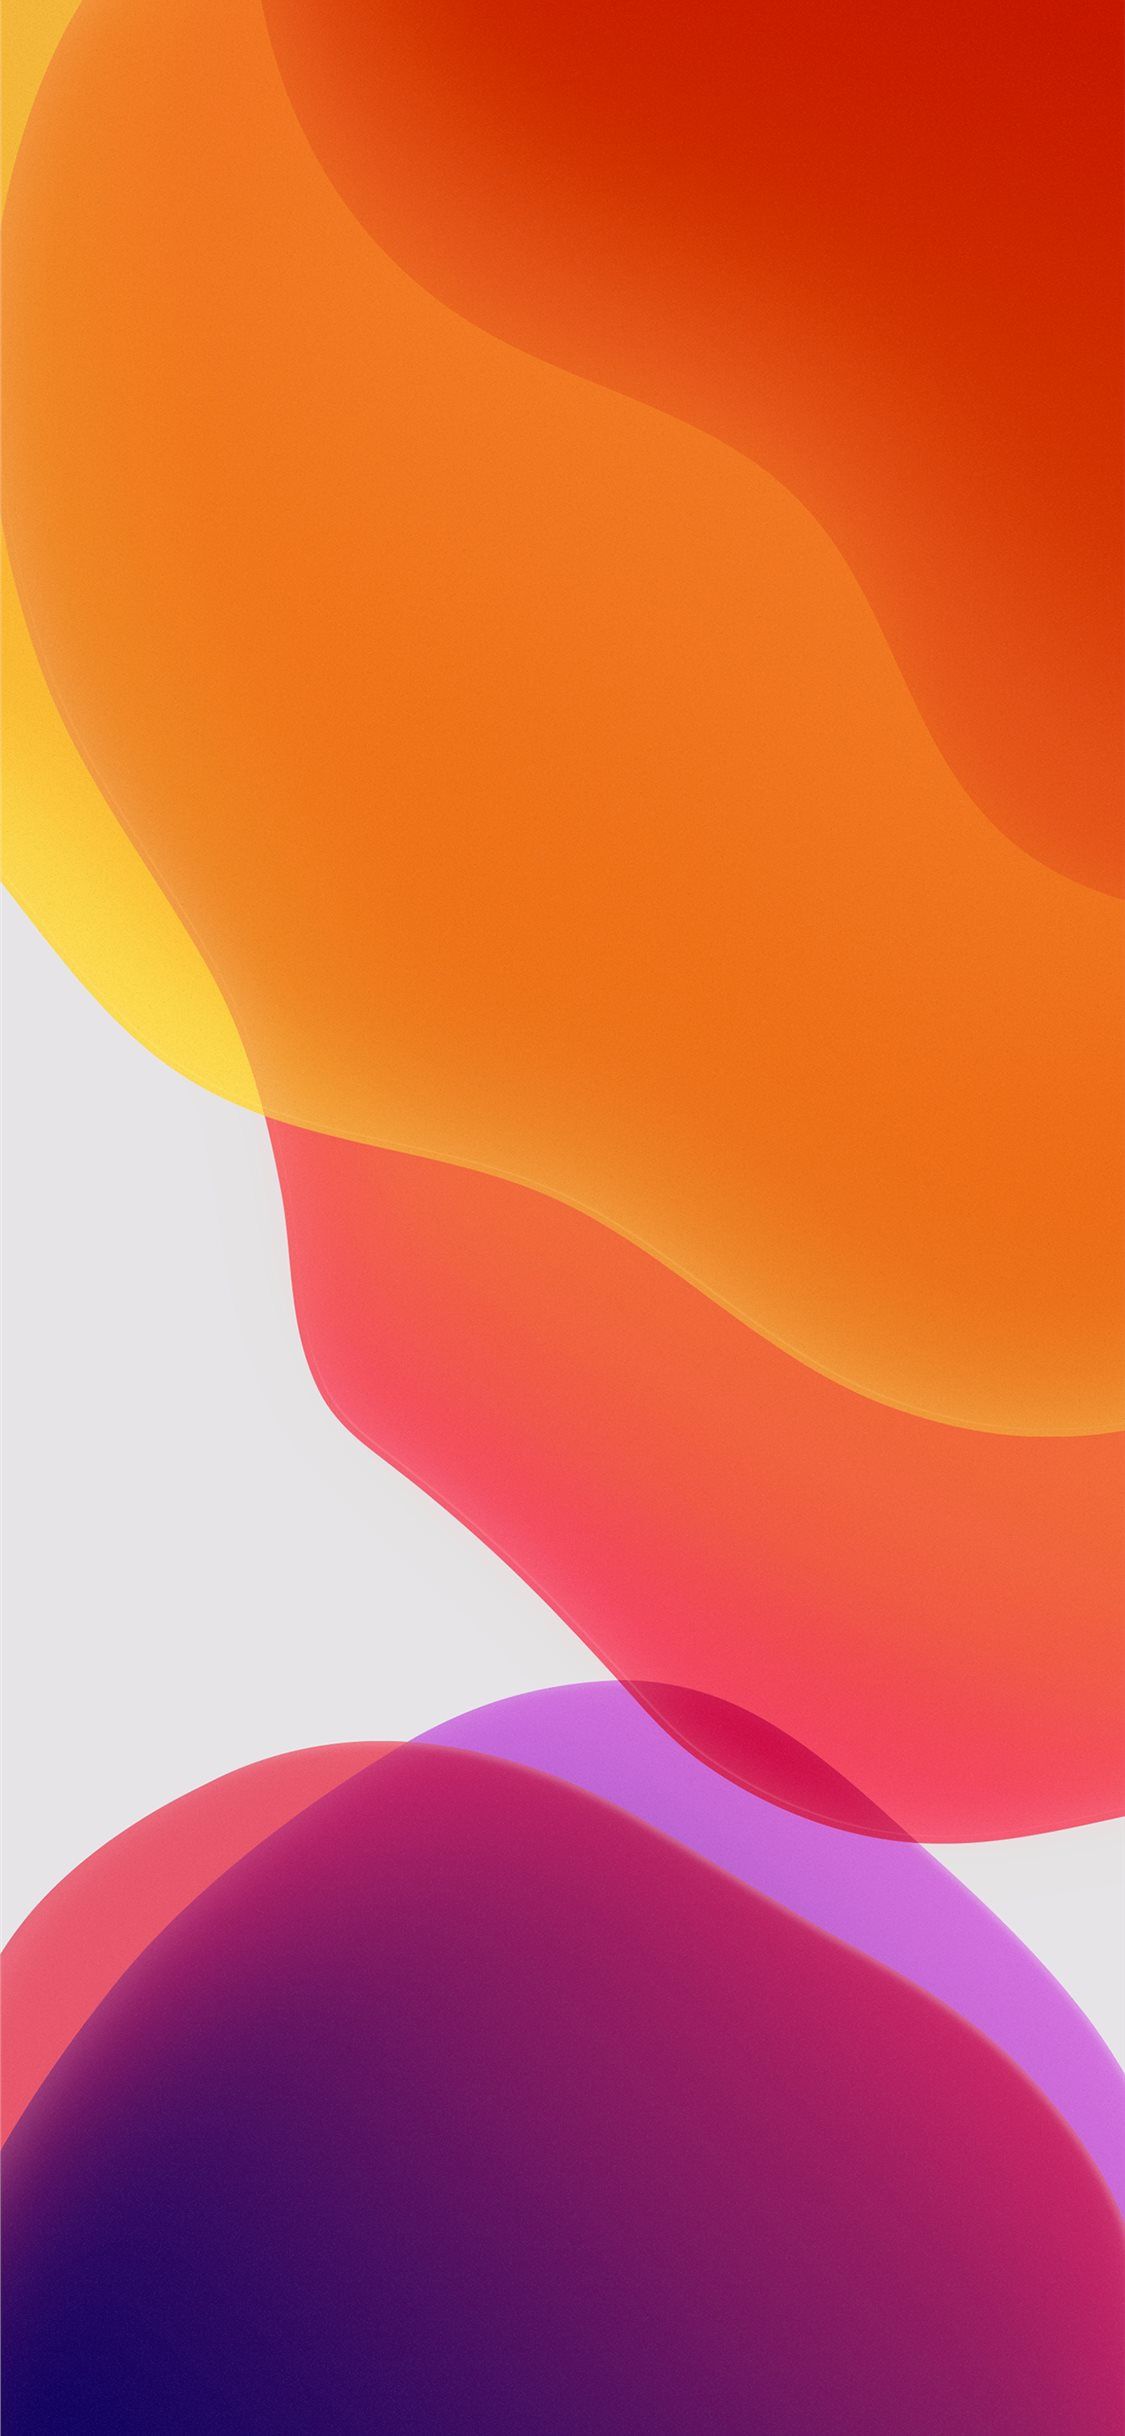 iPhone X Wallpapers on WallpaperDog